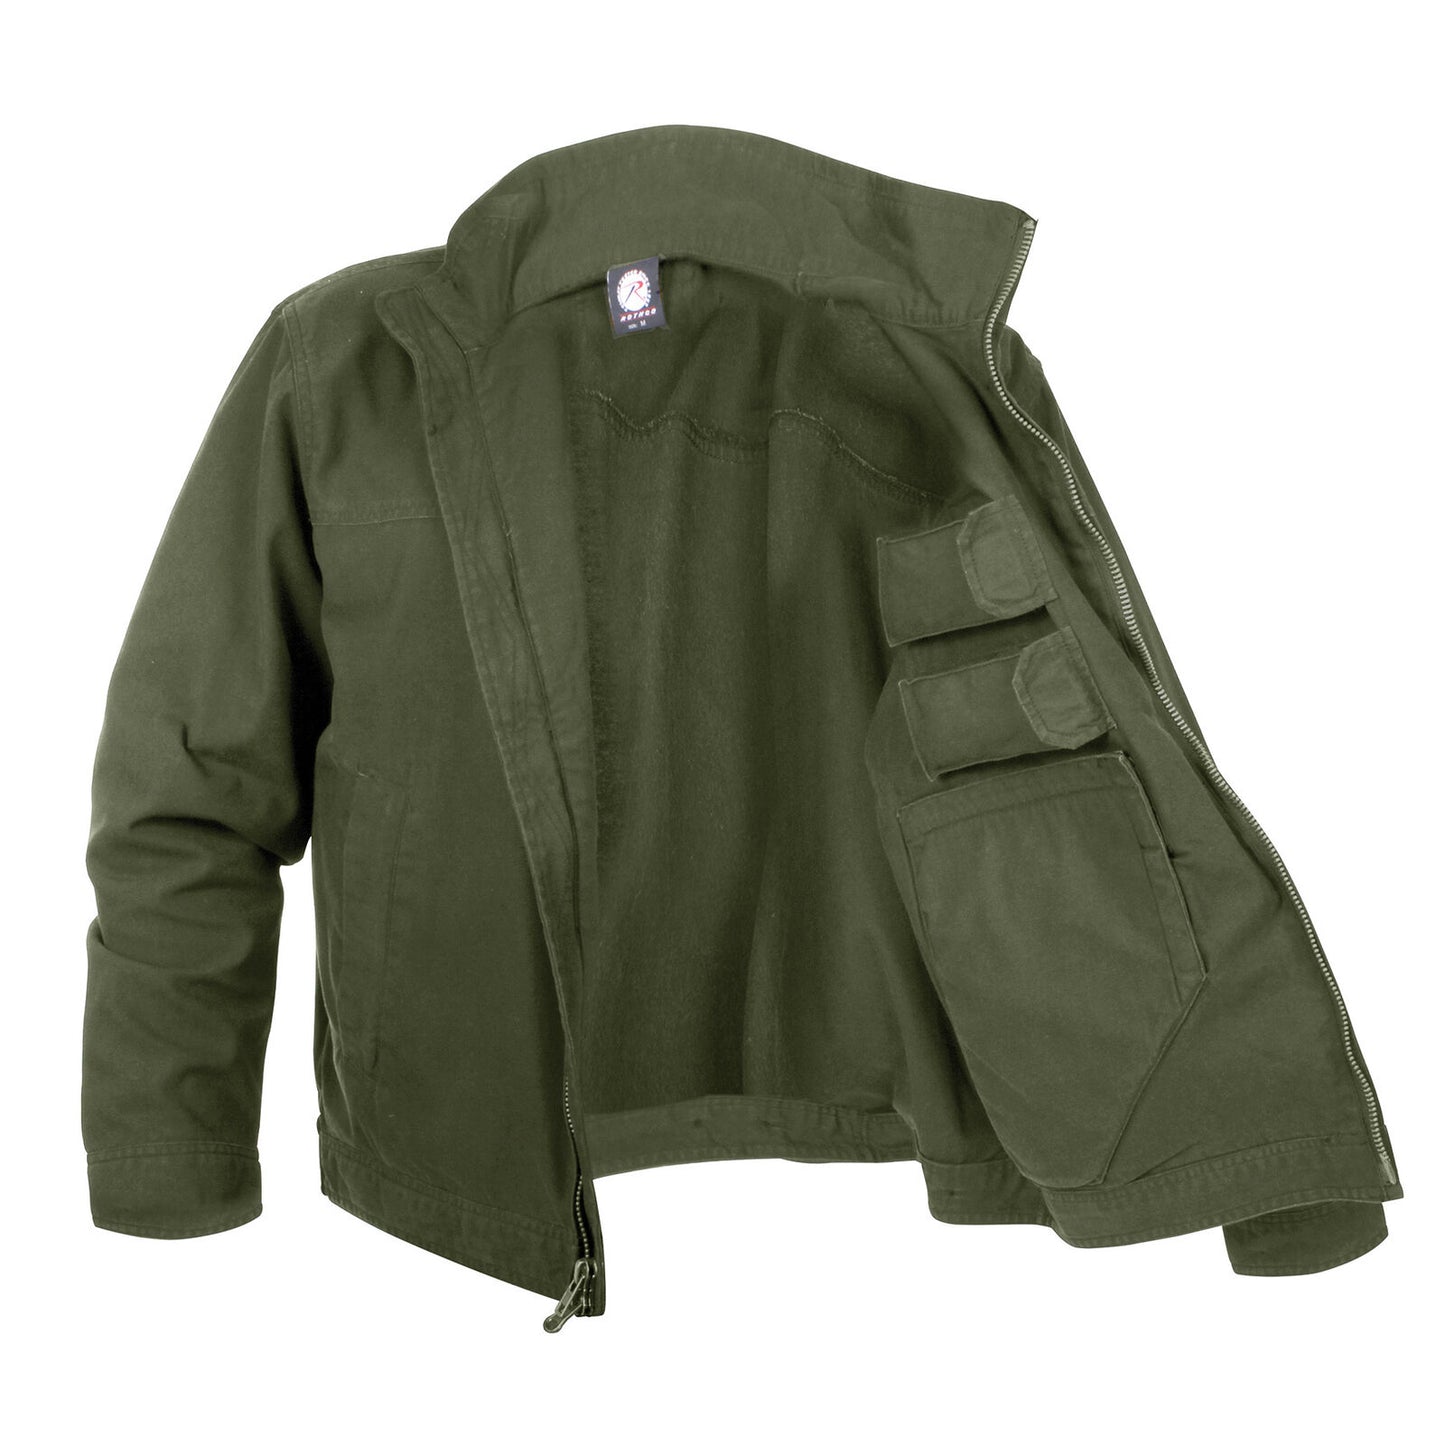 Men's Olive Drab Lightweight Tactical Concealed Carry Jacket by Rothco